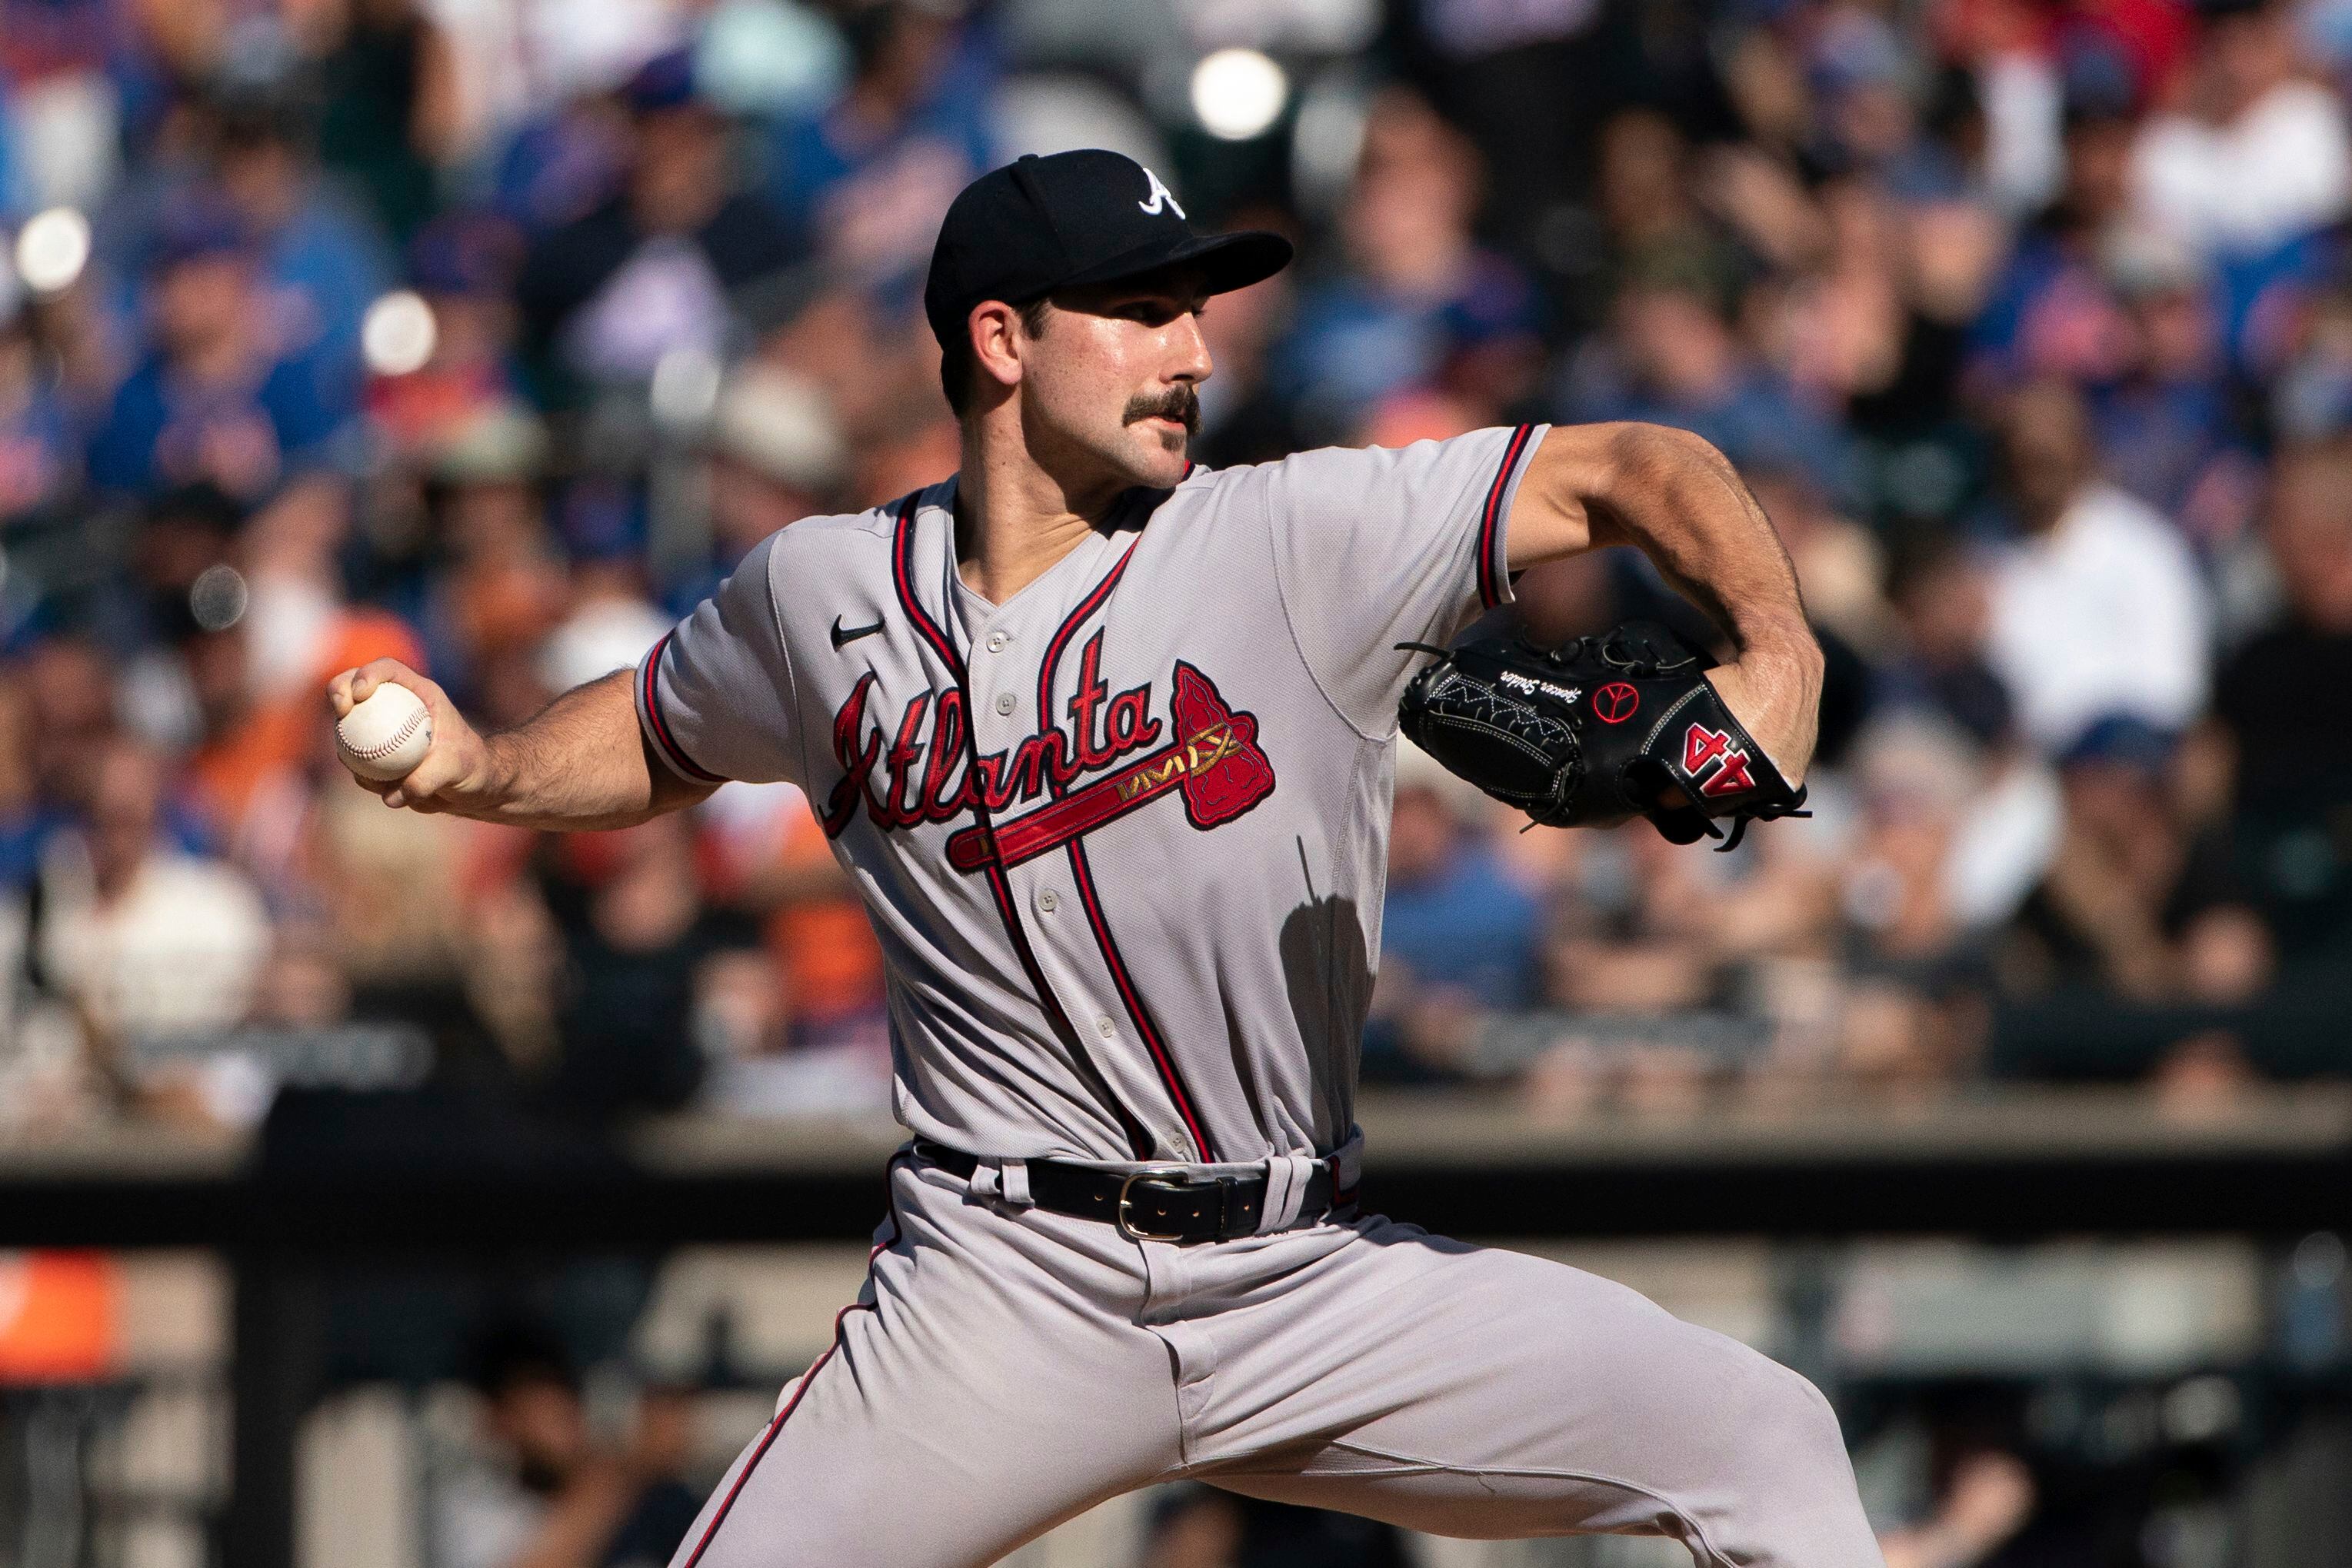 Dansby Swanson breaks up Jacob deGrom's no-hit bid with a two-run home run.  #MLB